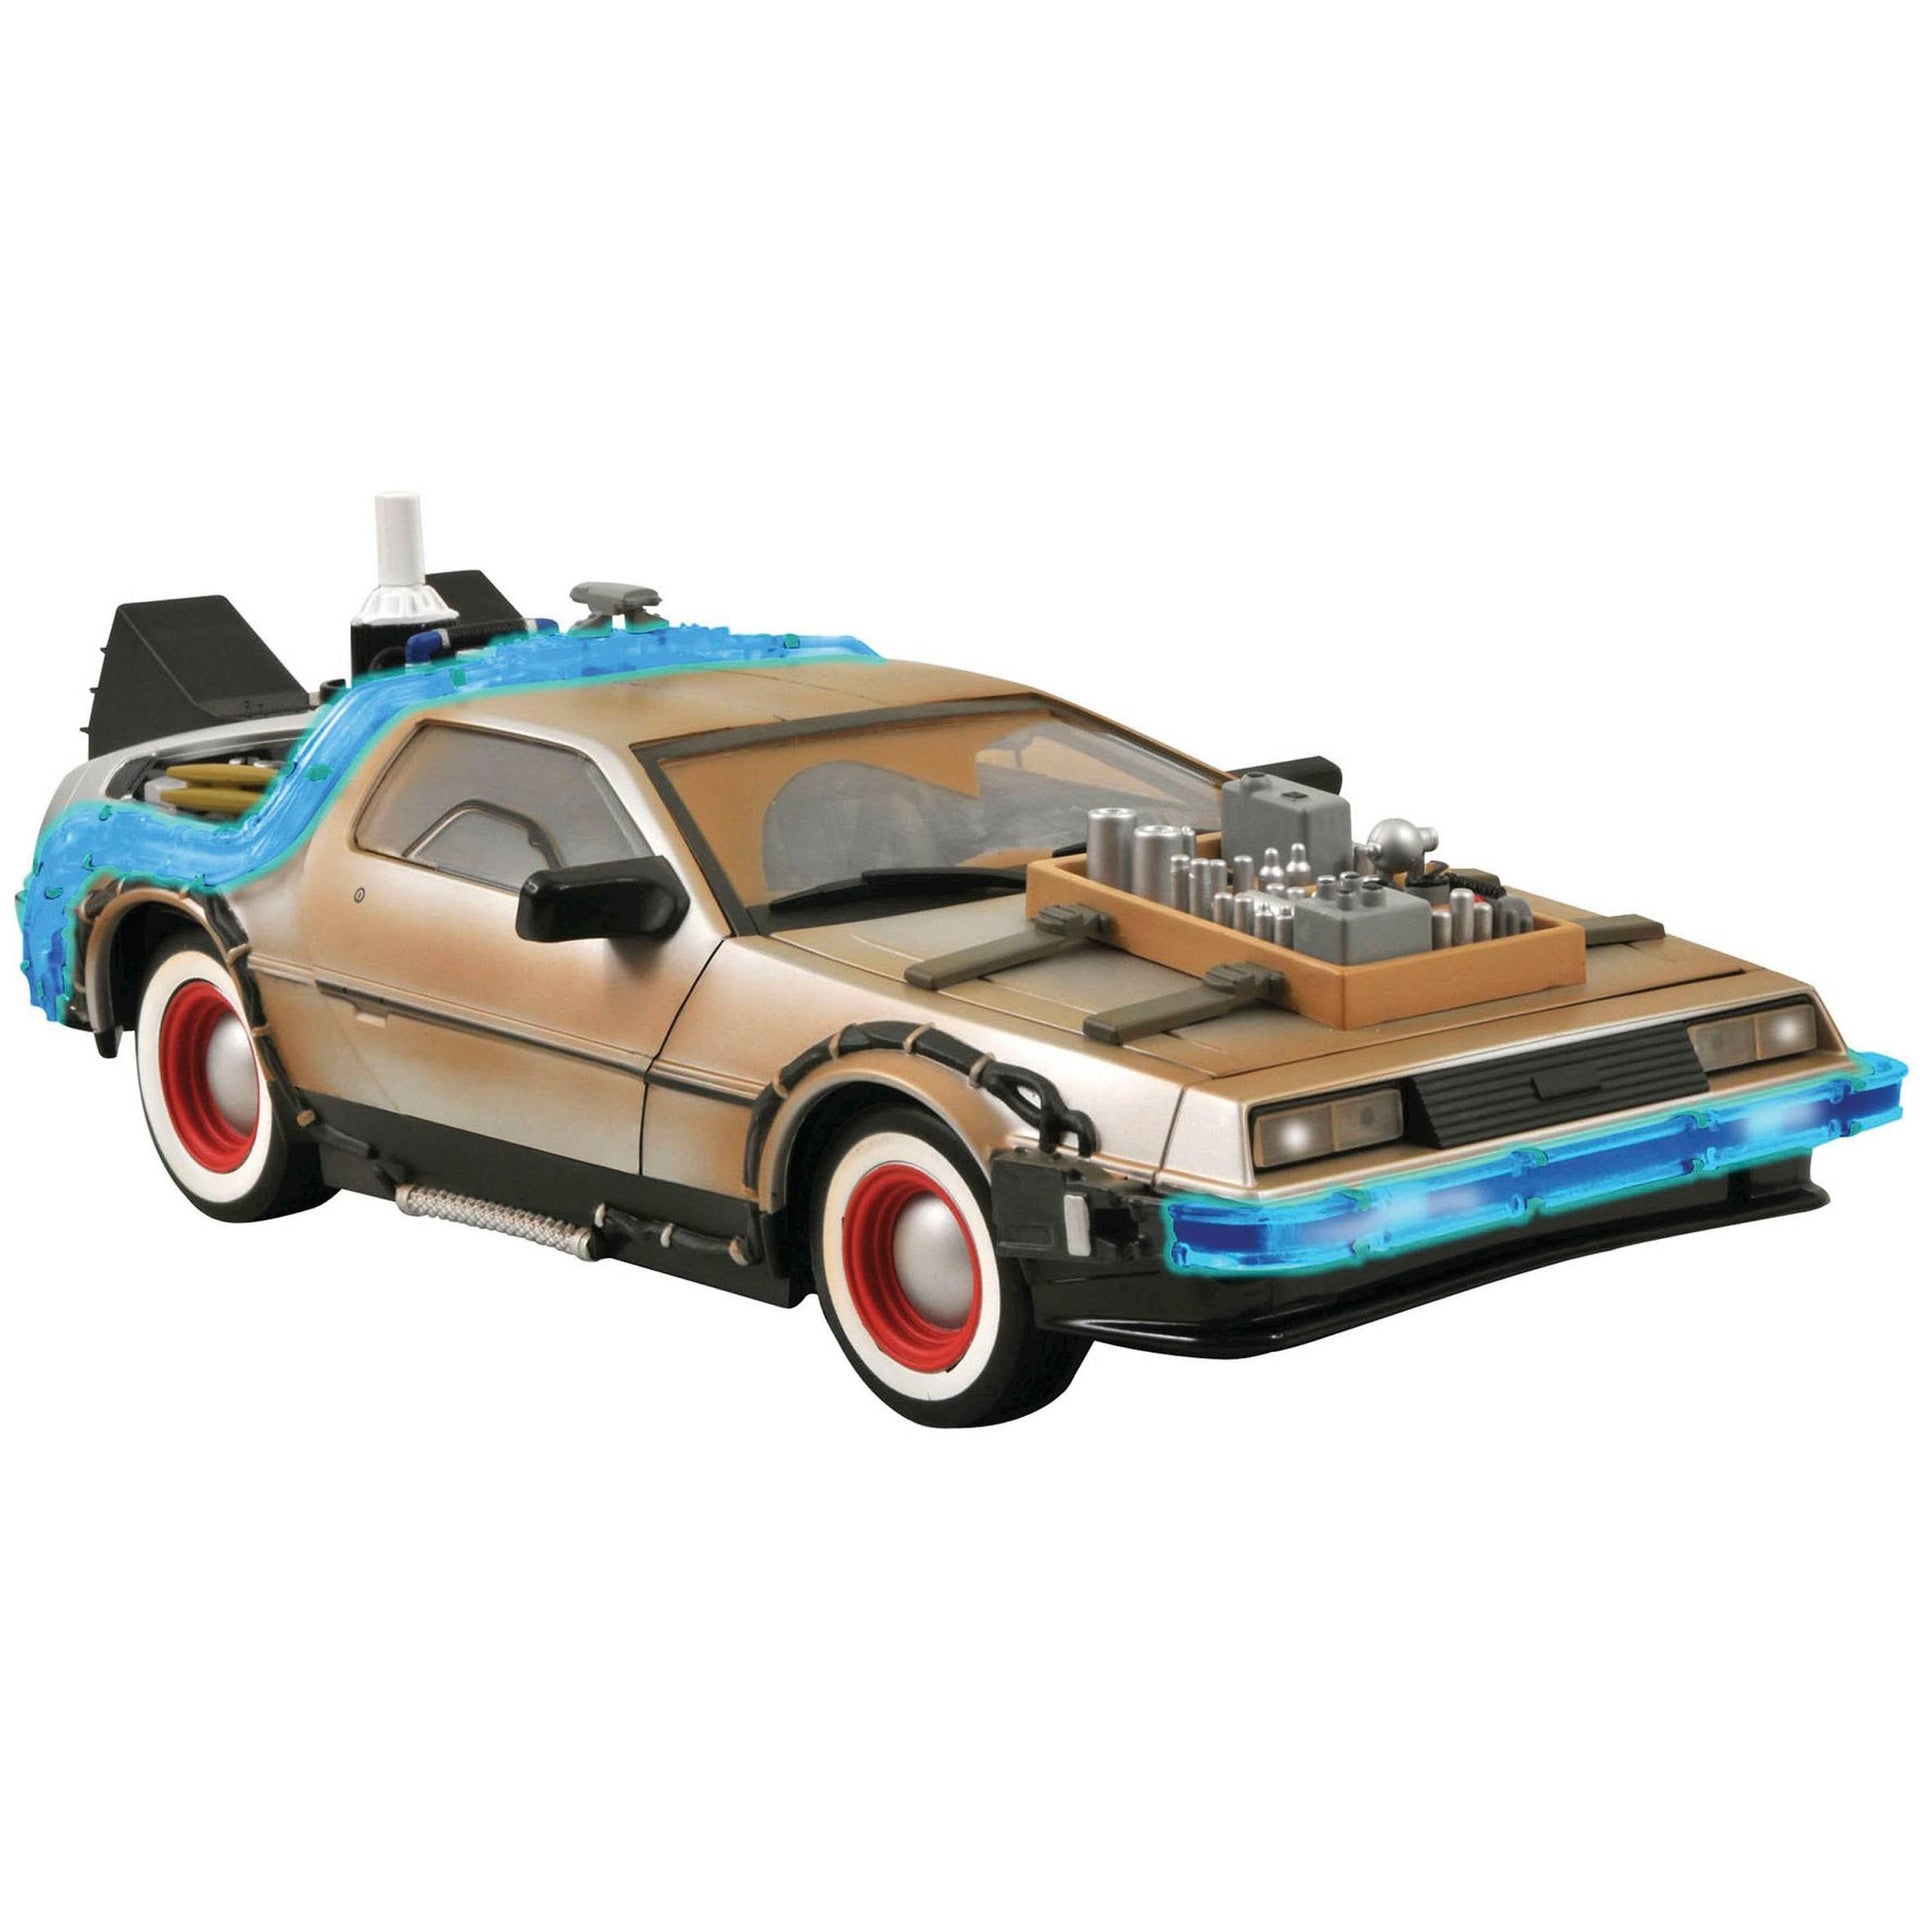 Diamond Select Toys Back to the Future III: Time Machine 1:15 Scale Electronic Vehicle - Nerd Arena